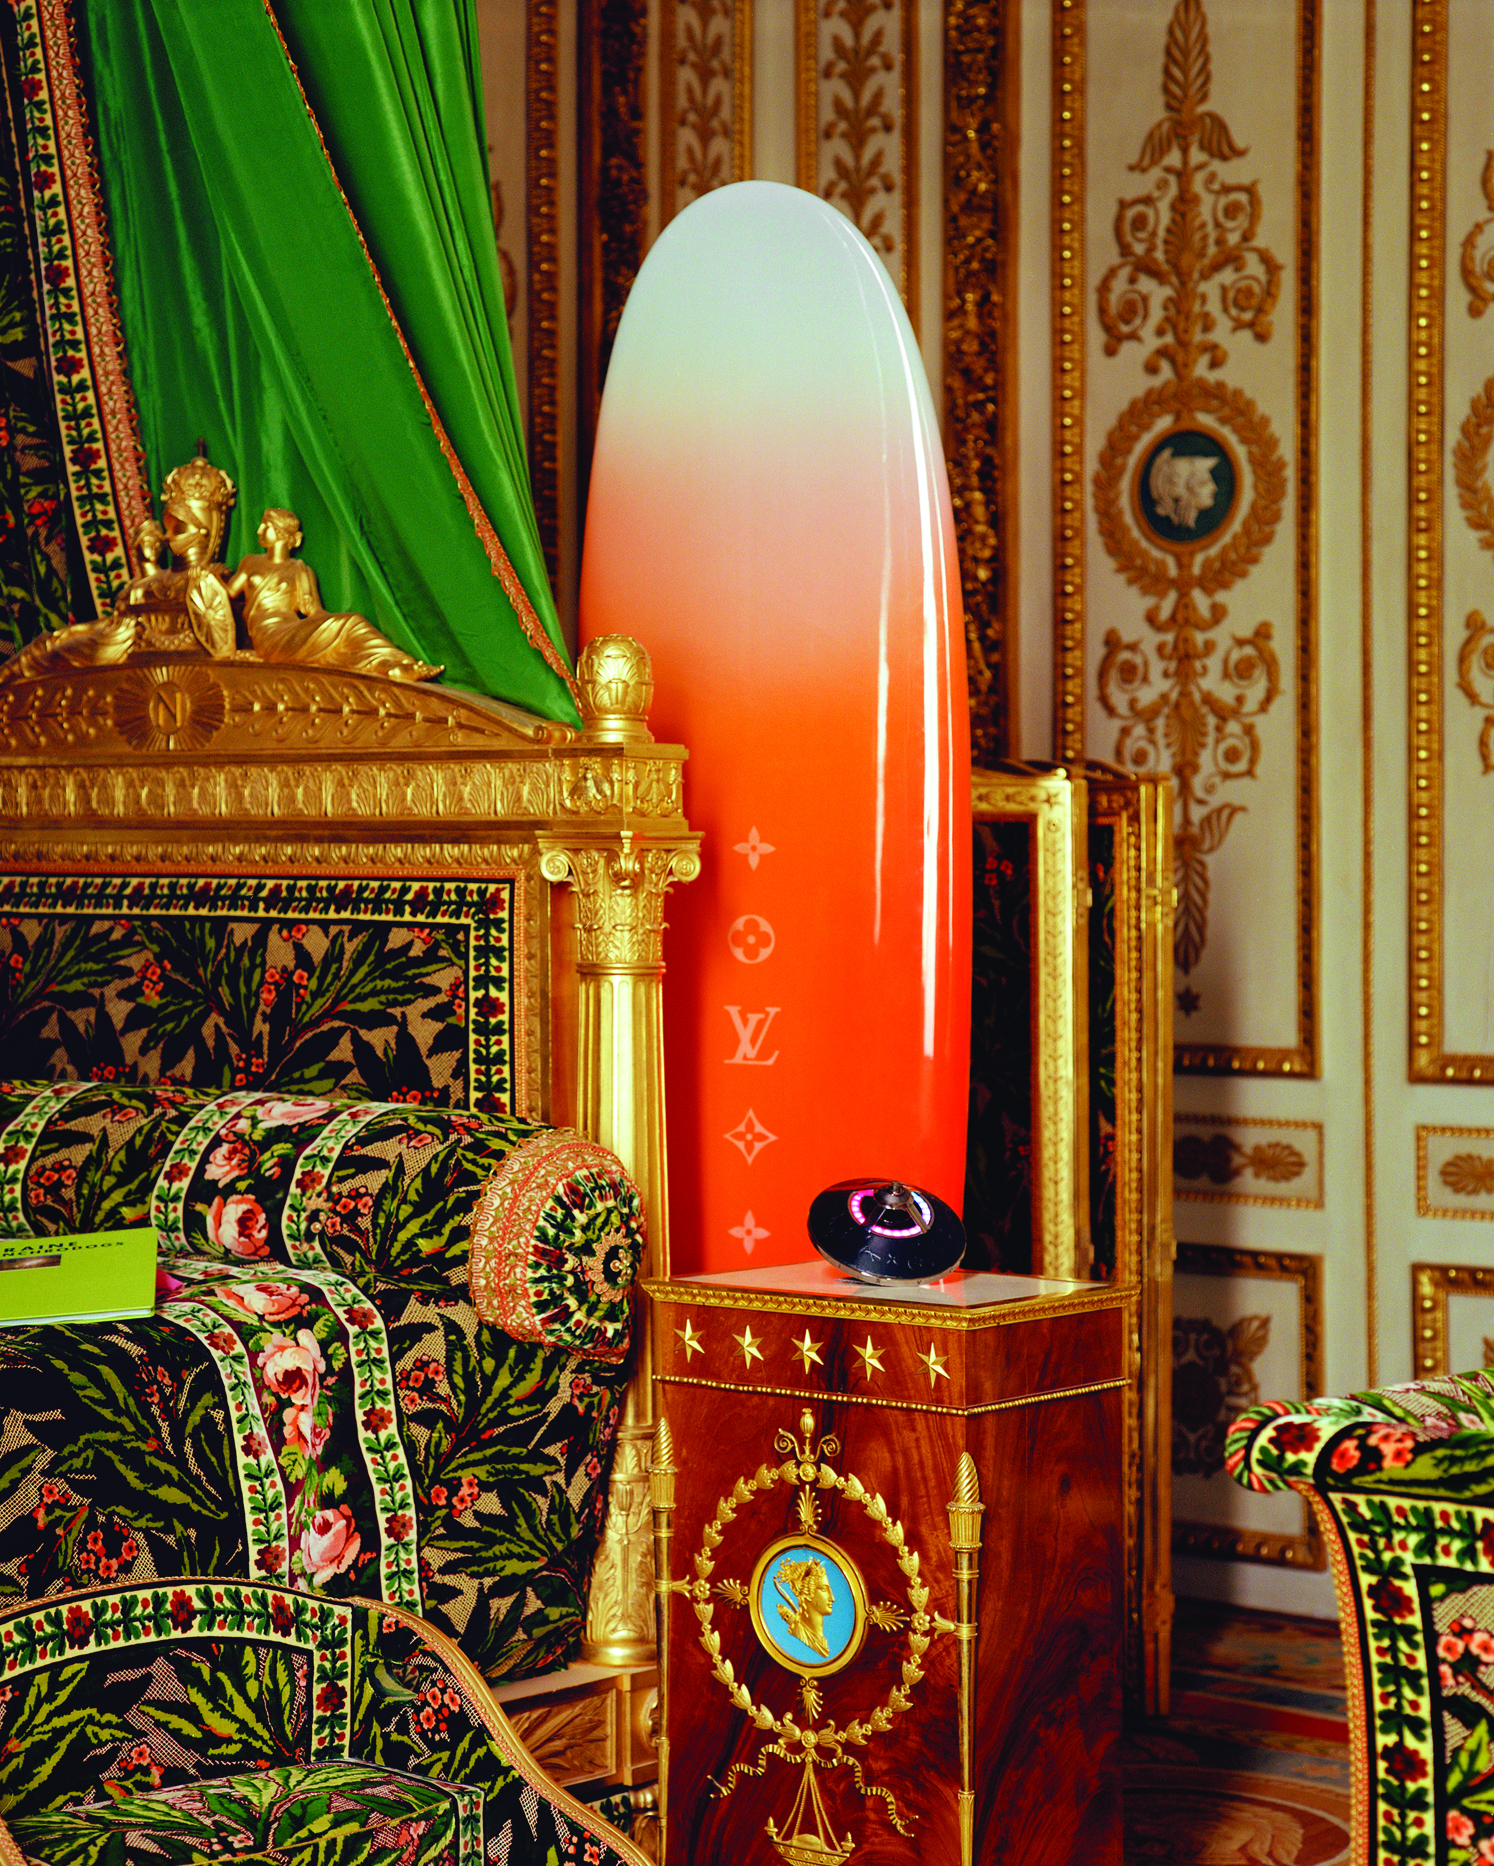 The wonders Marcel Wanders Studio created for Louis Vuitton Objet Nomades